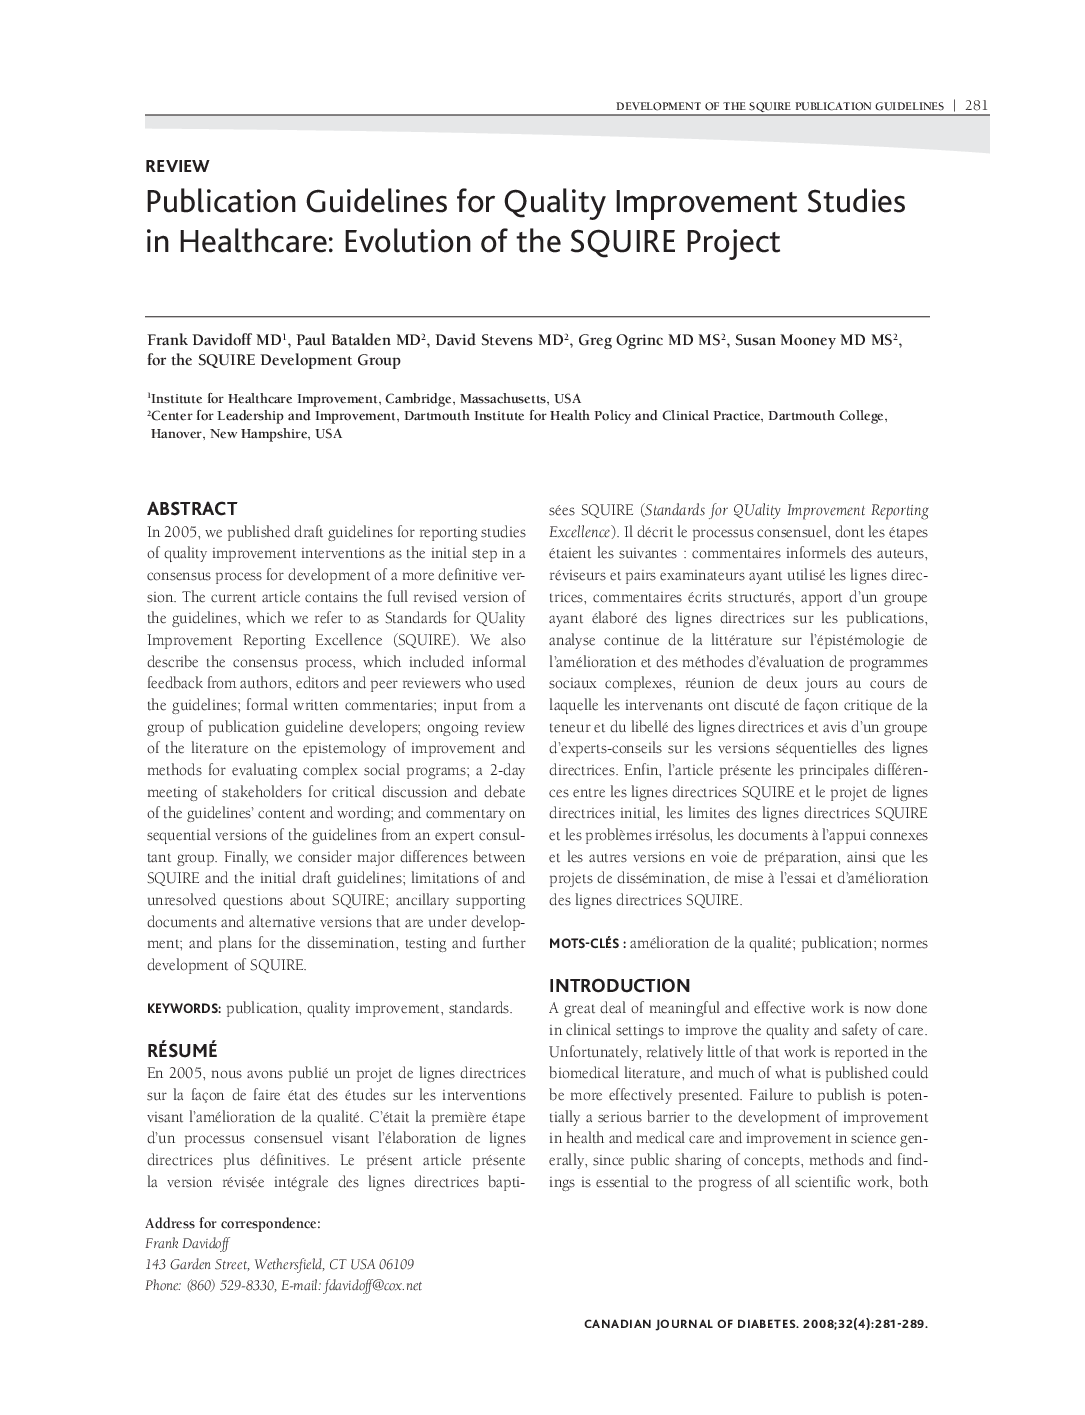 Publication Guidelines for Quality Improvement Studies in Healthcare: Evolution of the SQUIRE Project